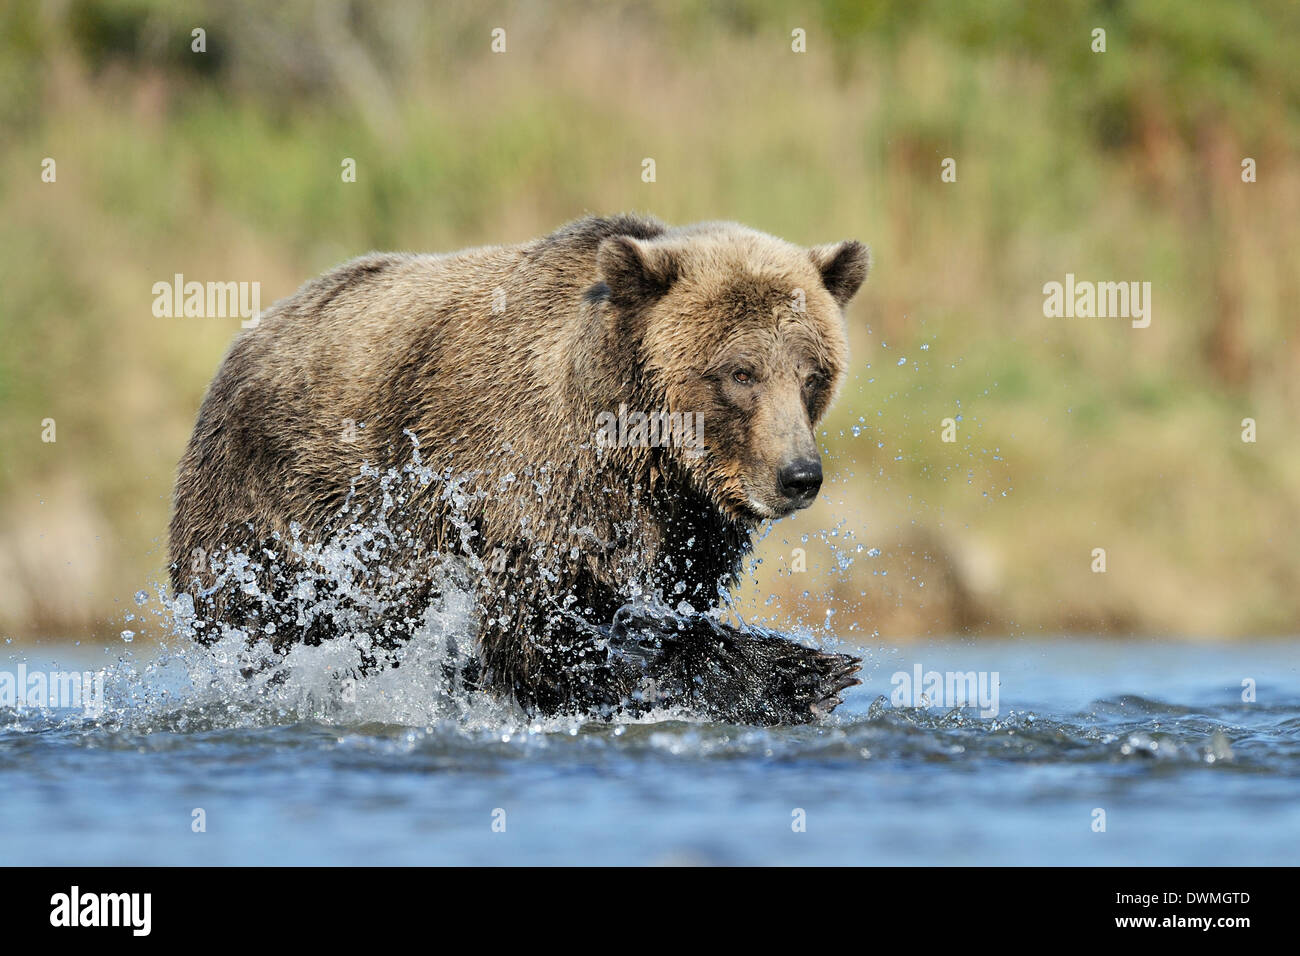 Grizzly bear (Ursus arctos horribilis) fishing in water and fish in front. Stock Photo